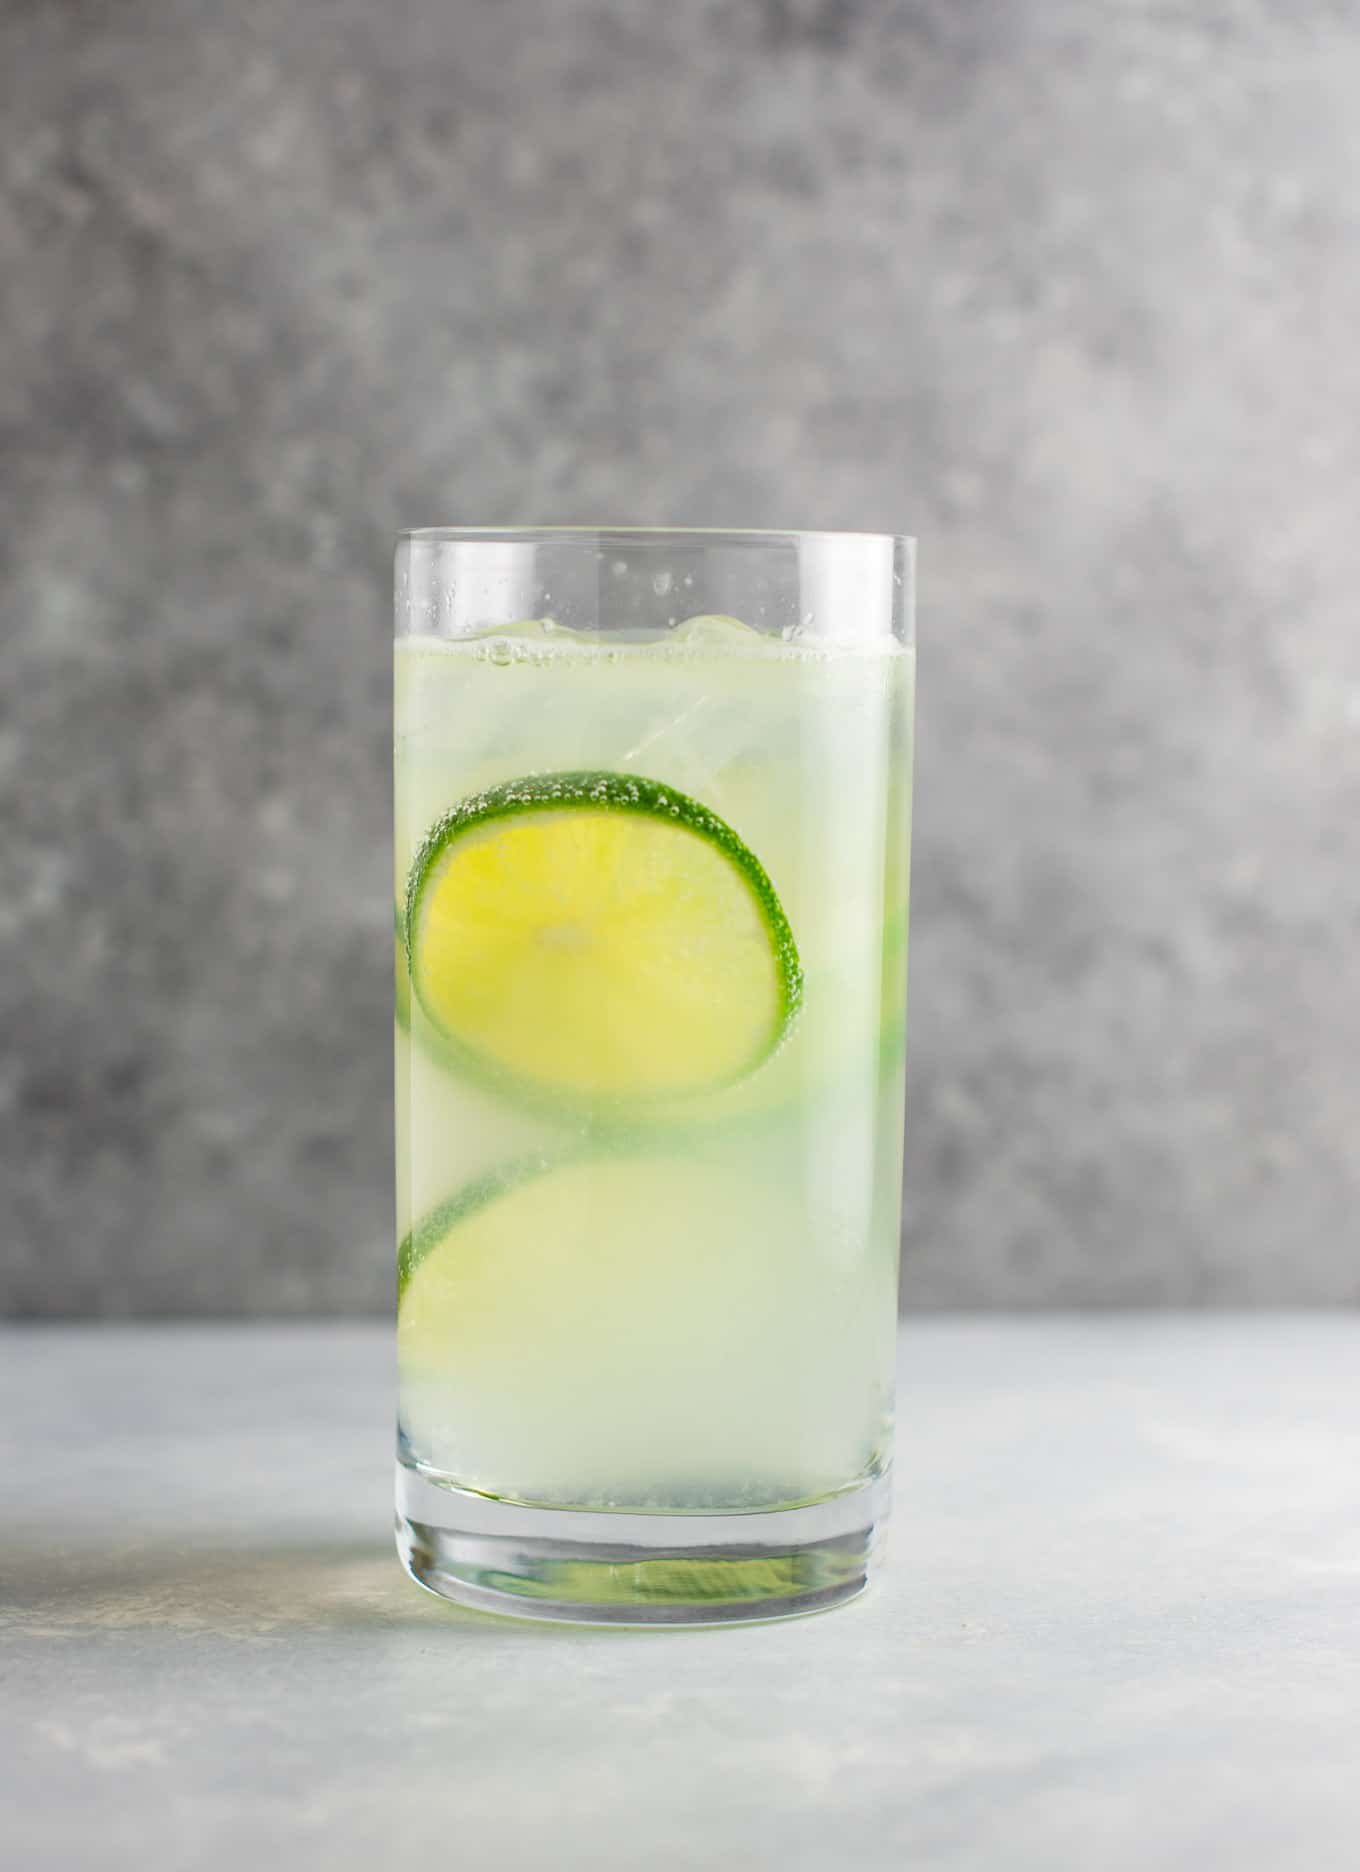 How to make gin rickey recipe – classic favorite + it’s a healthy alcoholic drink! #ginrickey #healthydrink #healthyalcoholicdrink #gin #gindrink #drinks #healthylifestyle